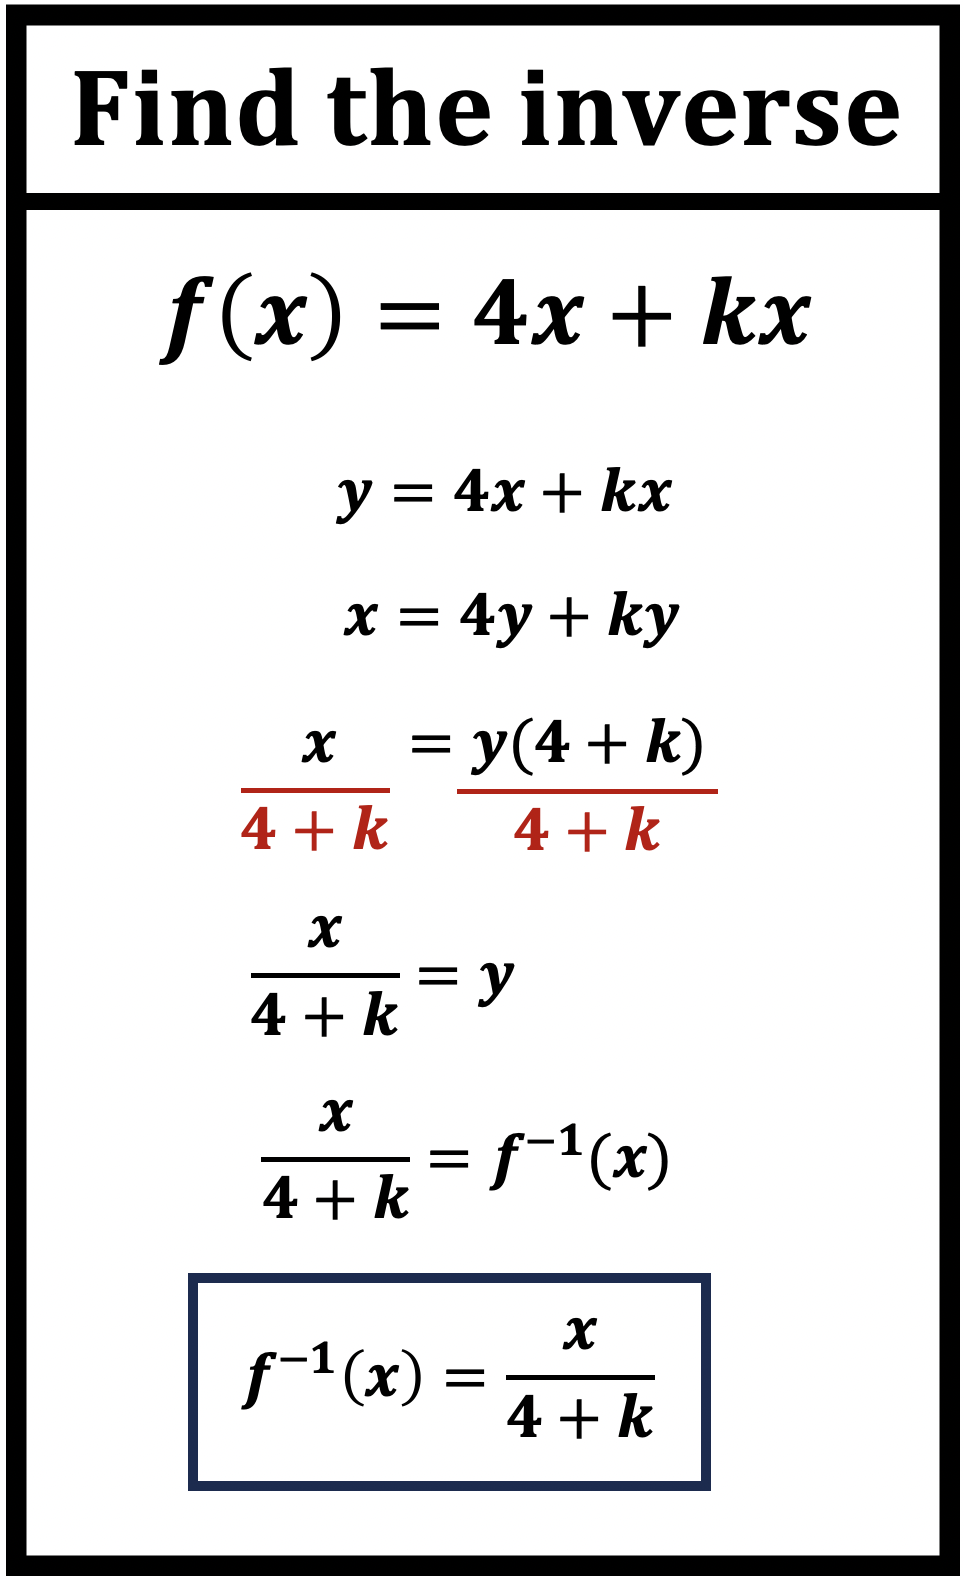 Example of an inverse function